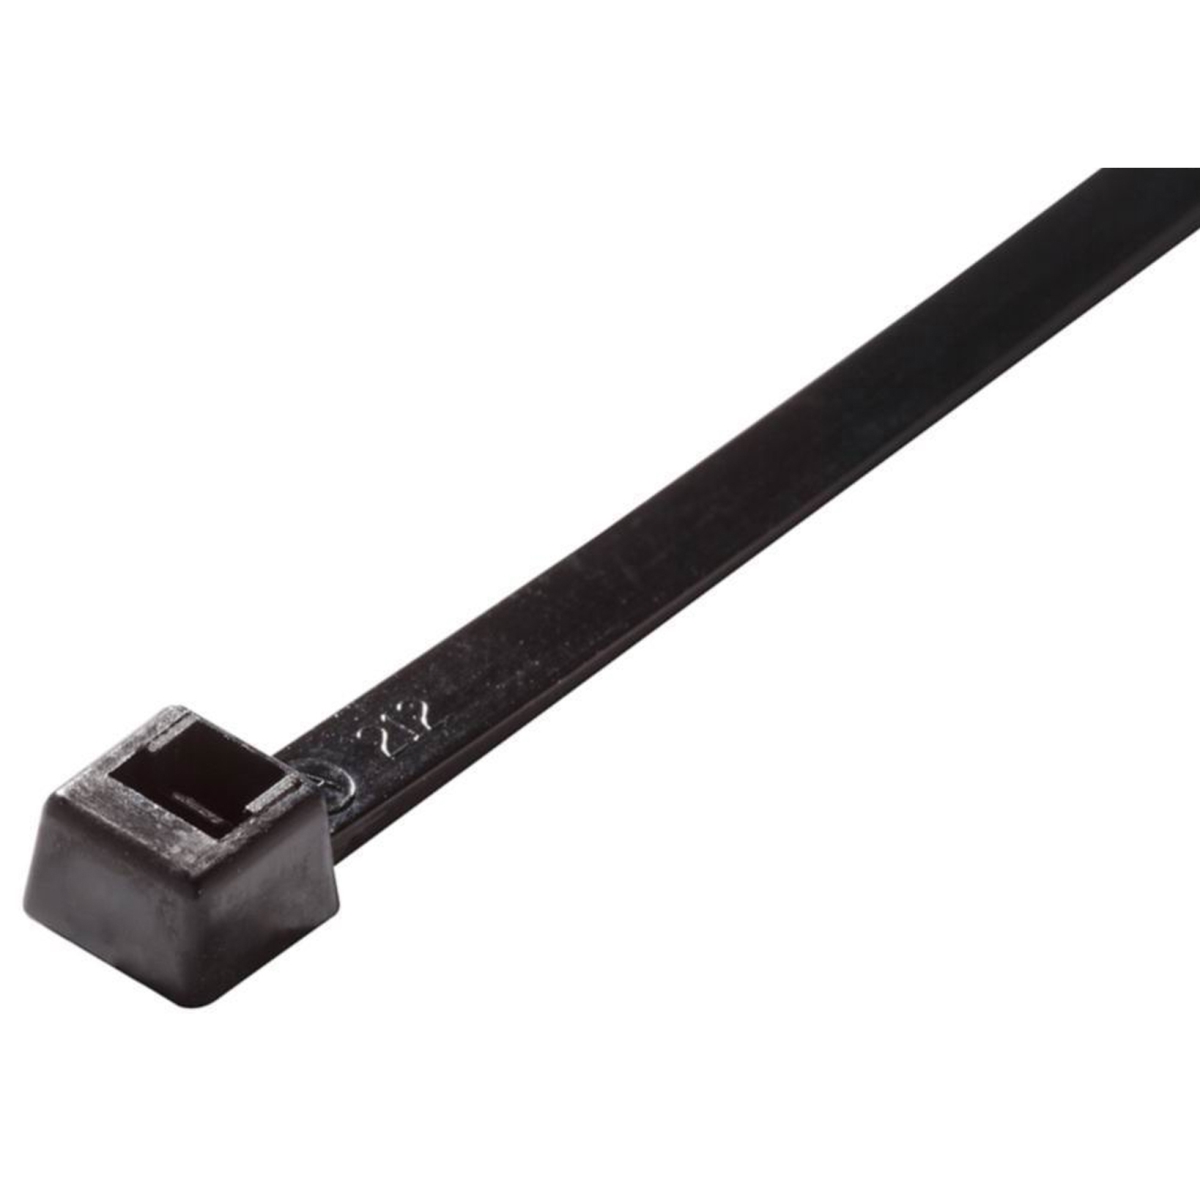 Be-0181b Black 5.8 In. Cable Ties Set, Black - 25 Count